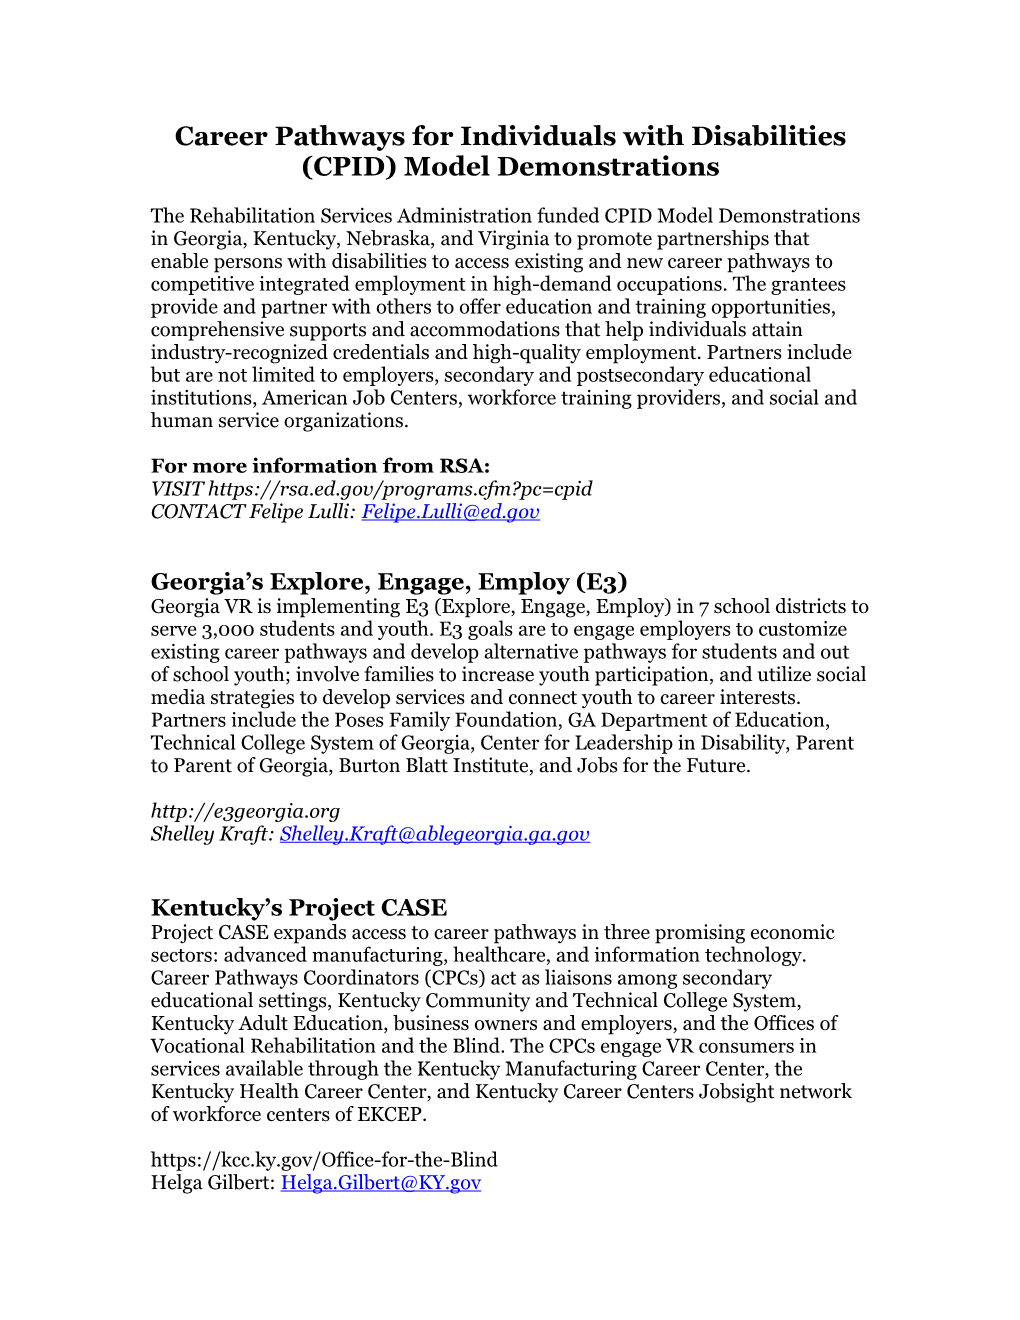 Career Pathways for Individuals with Disabilities (CPID) Model Demonstrations